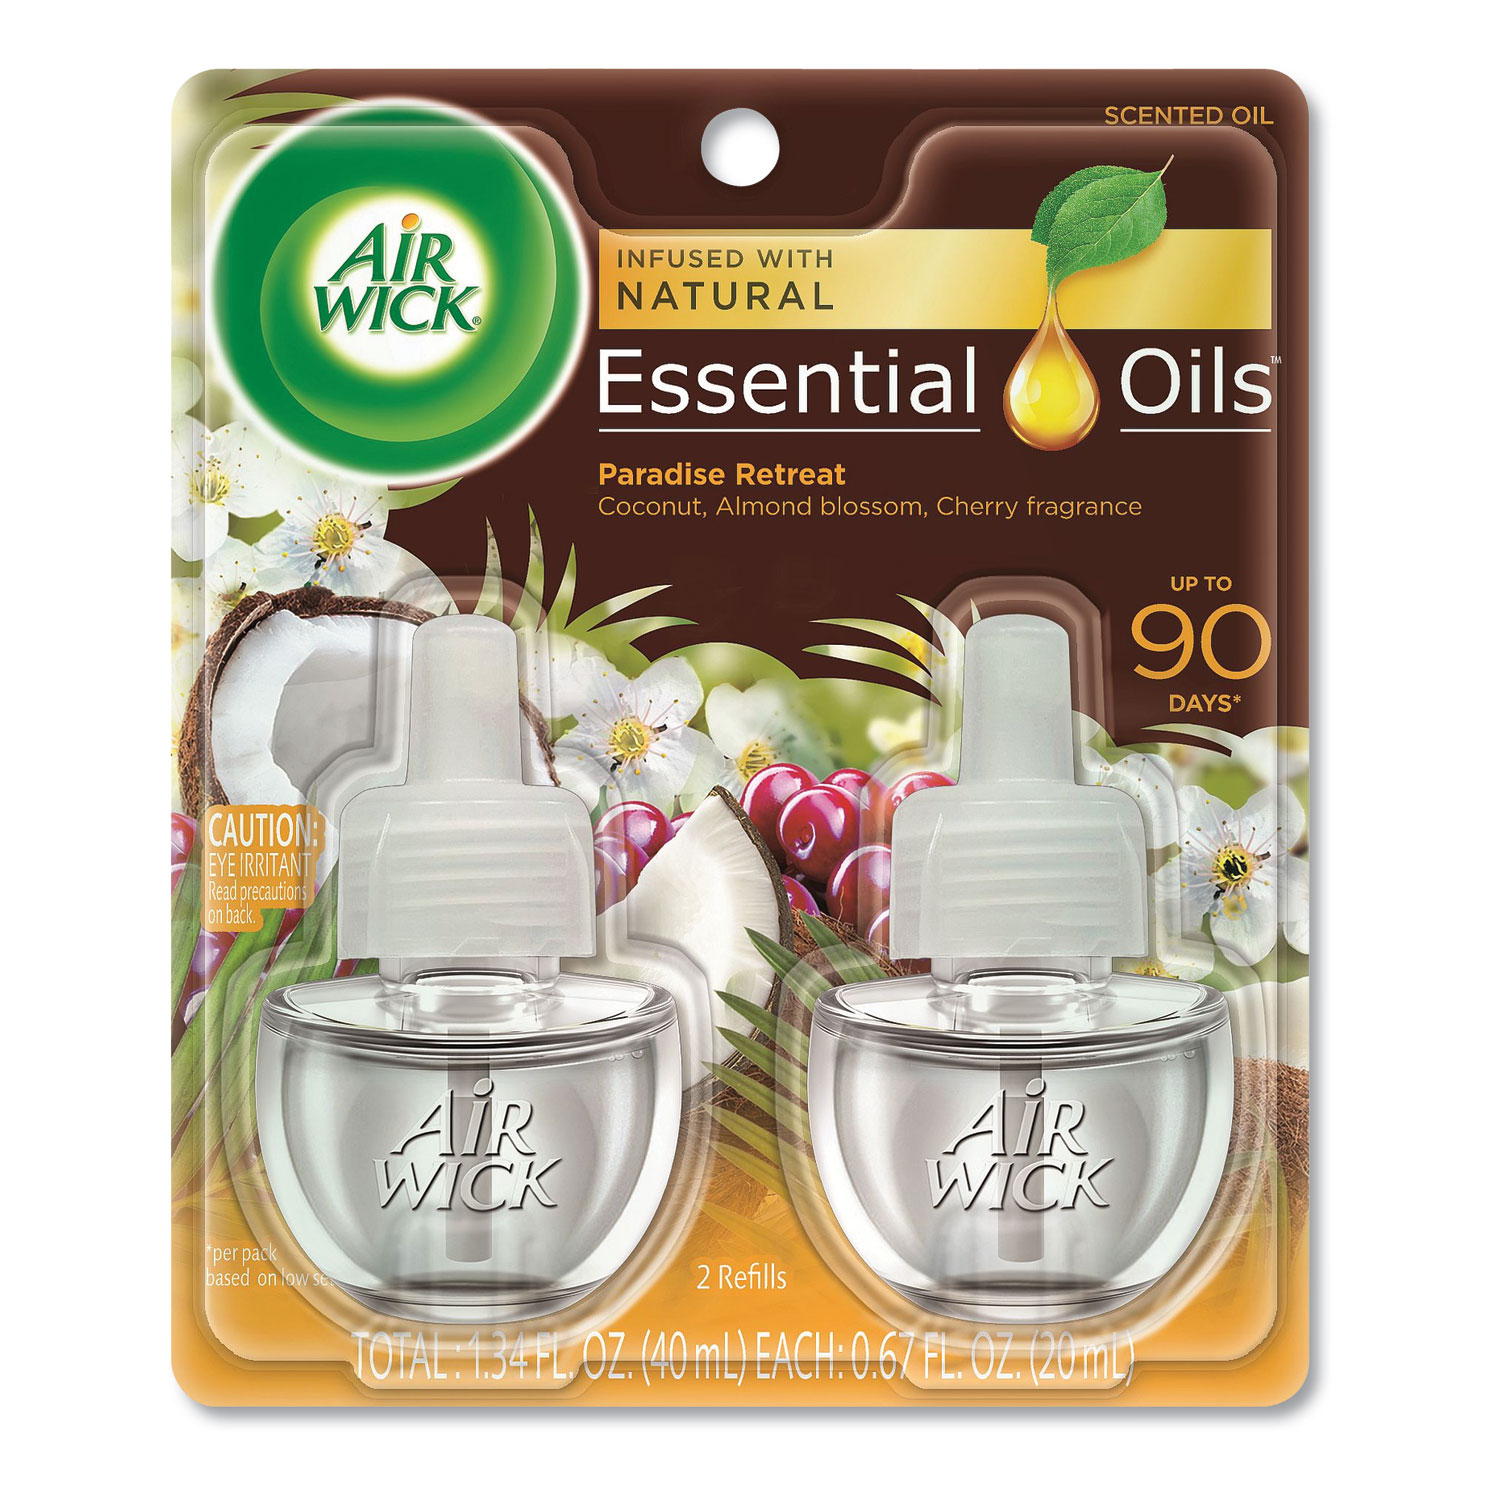  Air Wick 62338-91110 Life Scents Scented Oil Refills, Paradise Retreat, 0.67 oz, 2/Pack (RAC91110PK) 